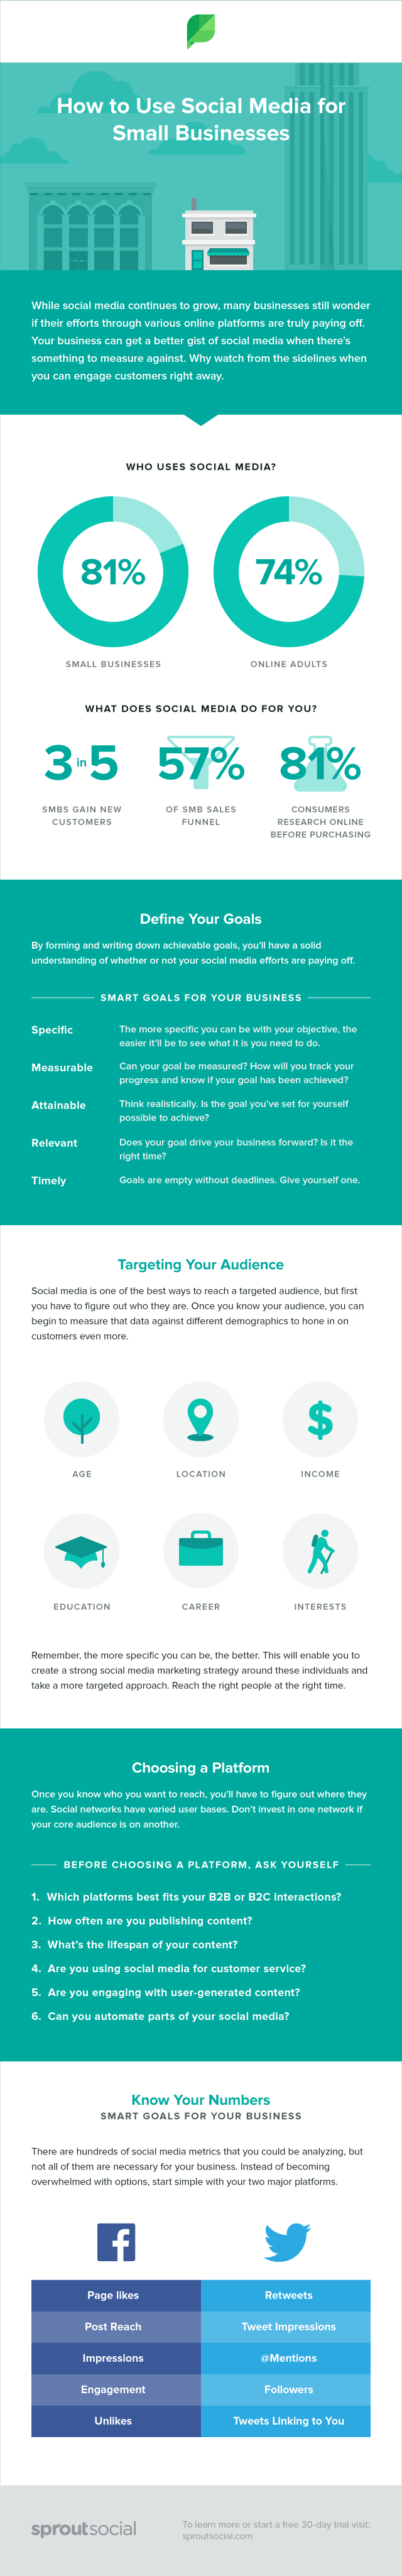 Social Media Marketing For Your Company: Think Strategic, Not Scattered